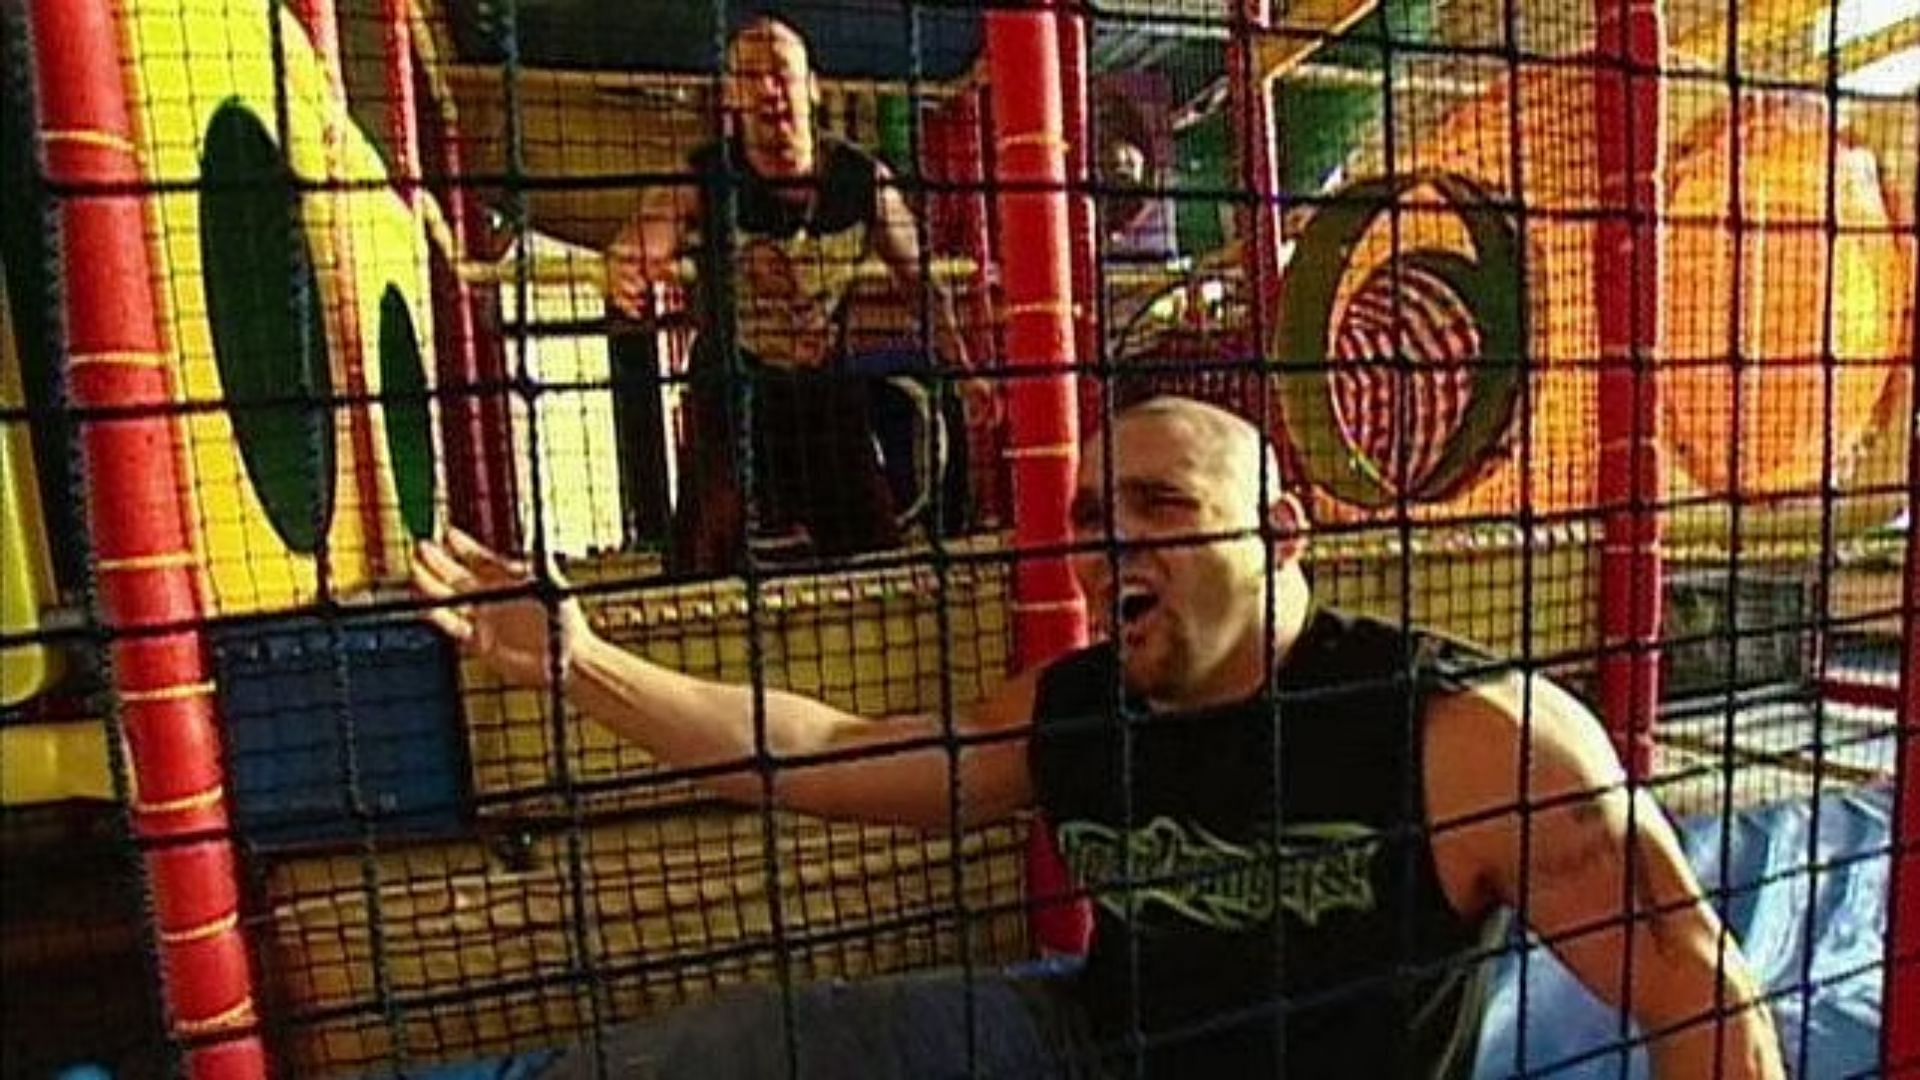 The Headbangers (Mosh &amp; Thrasher) once attacked Crash Holly at an indoor playground